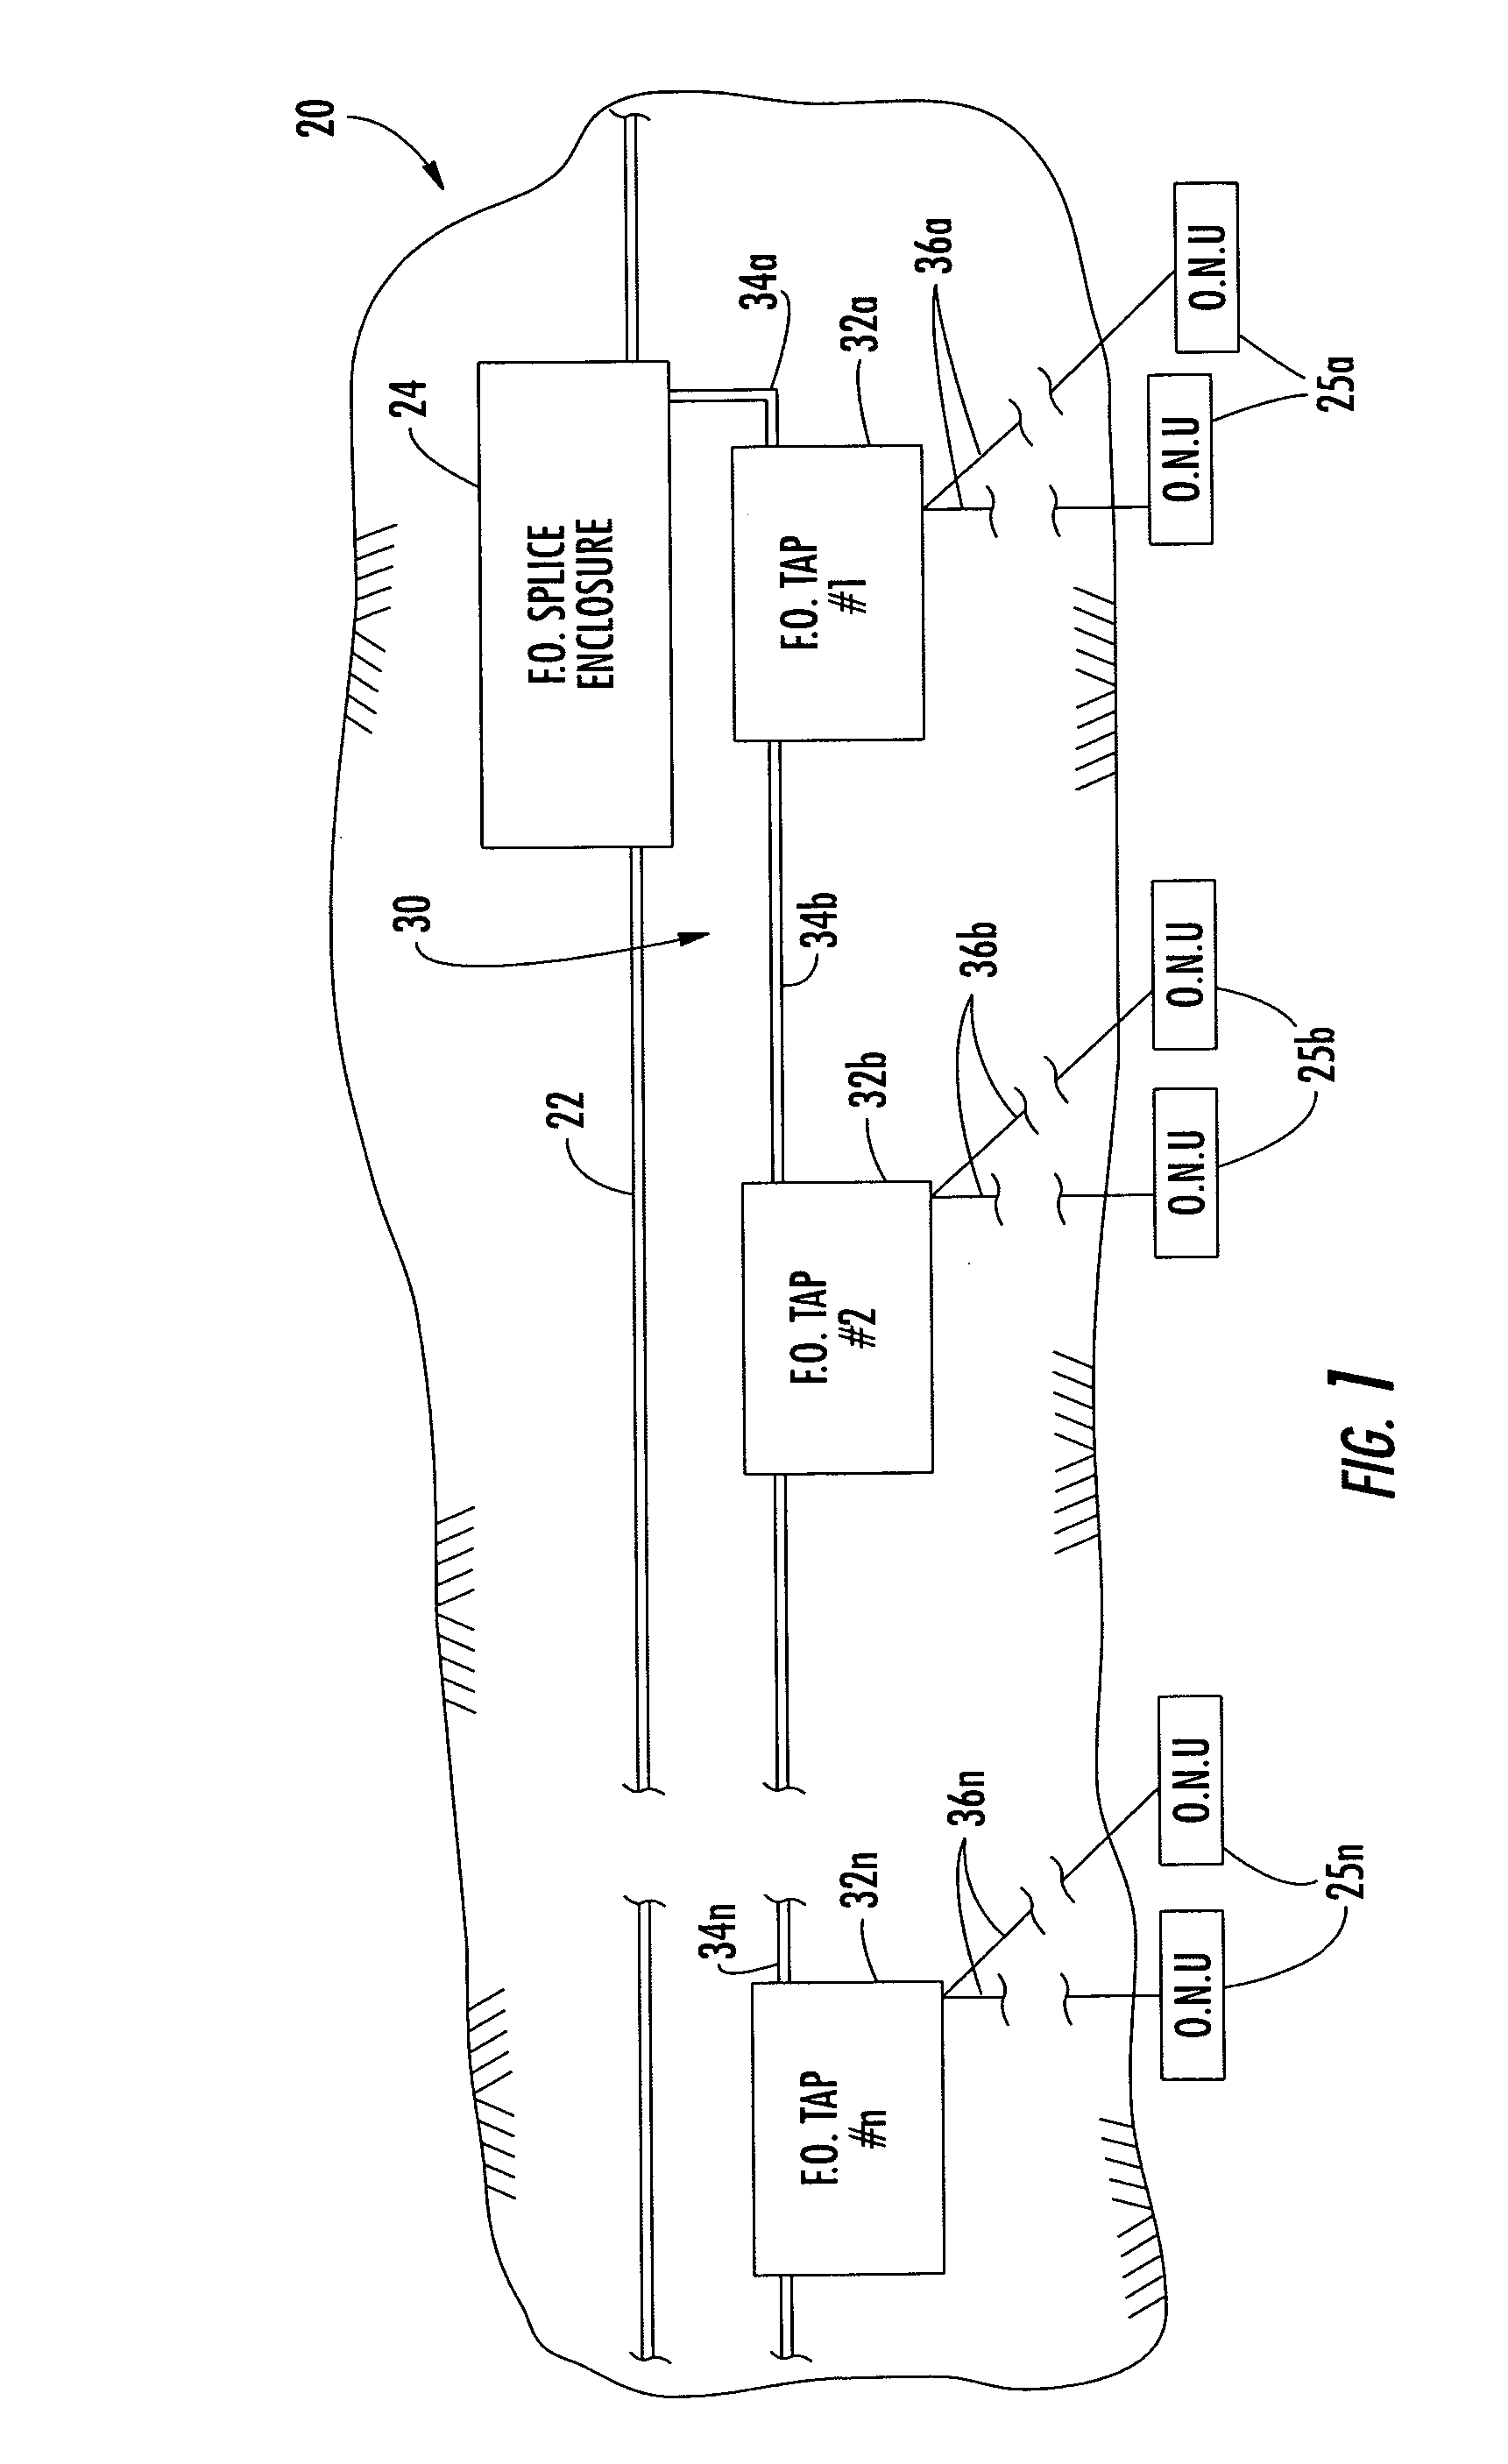 Buried fiber optic system including a sub-distribution system and related methods